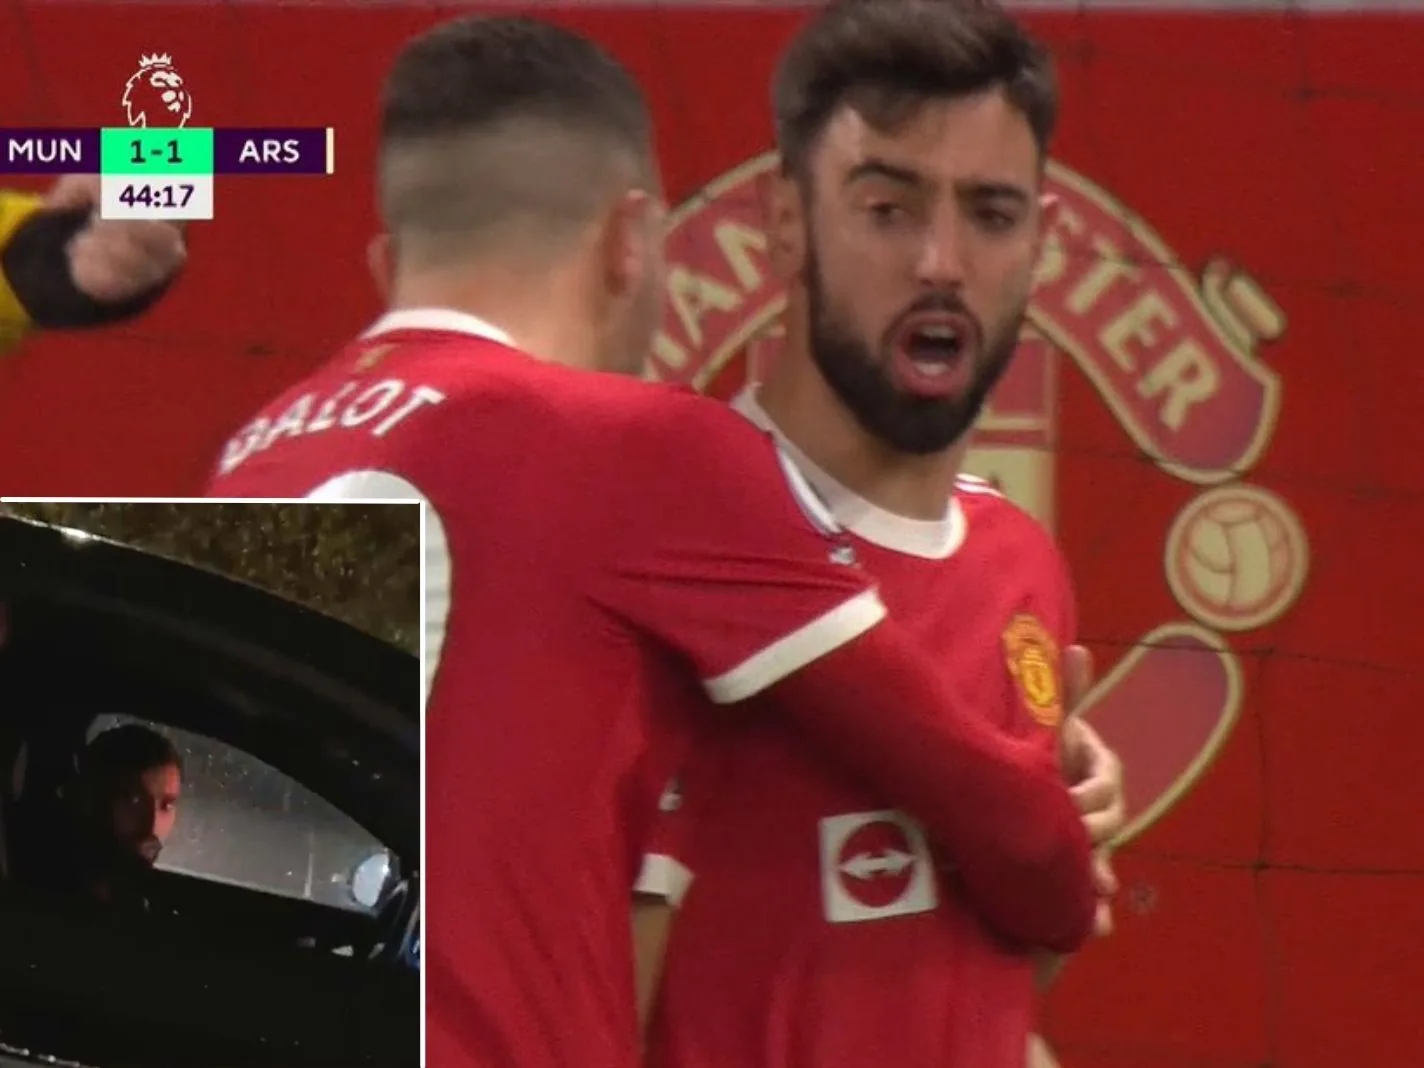 Bruno Fernandes scored a goal during Man Utd's win over Arsenal and then stopped at traffic light debating a fan's FPL pick of Salah over him